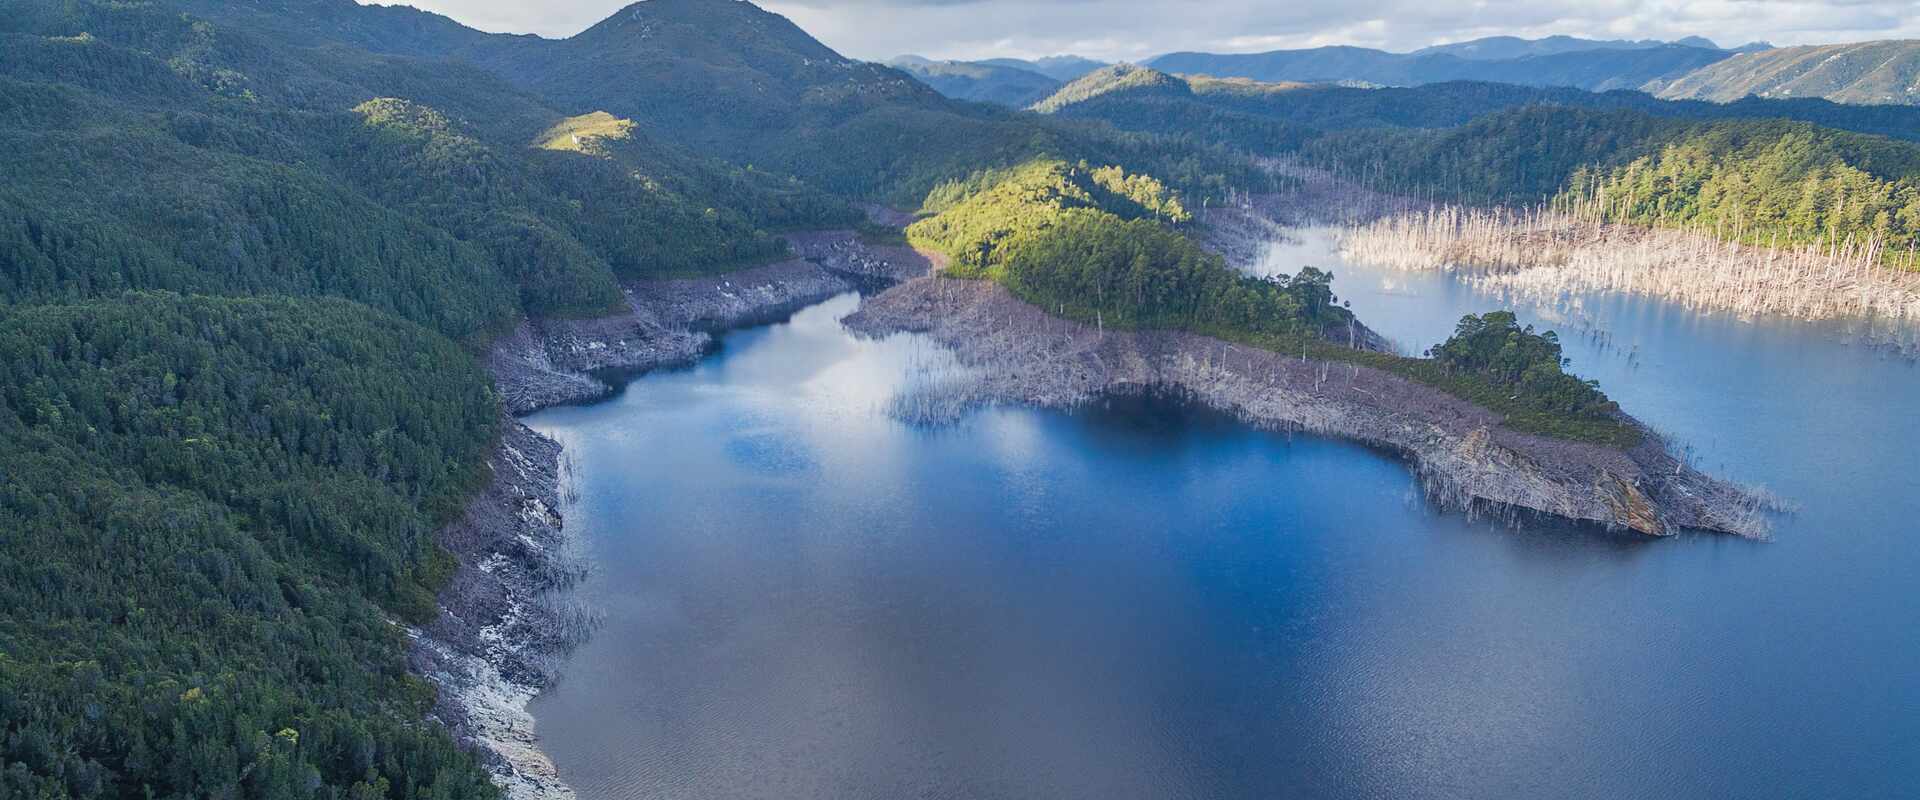 Aerial view of the rolling hills surrounding the dark waters of the Gordon River region, Tasmania